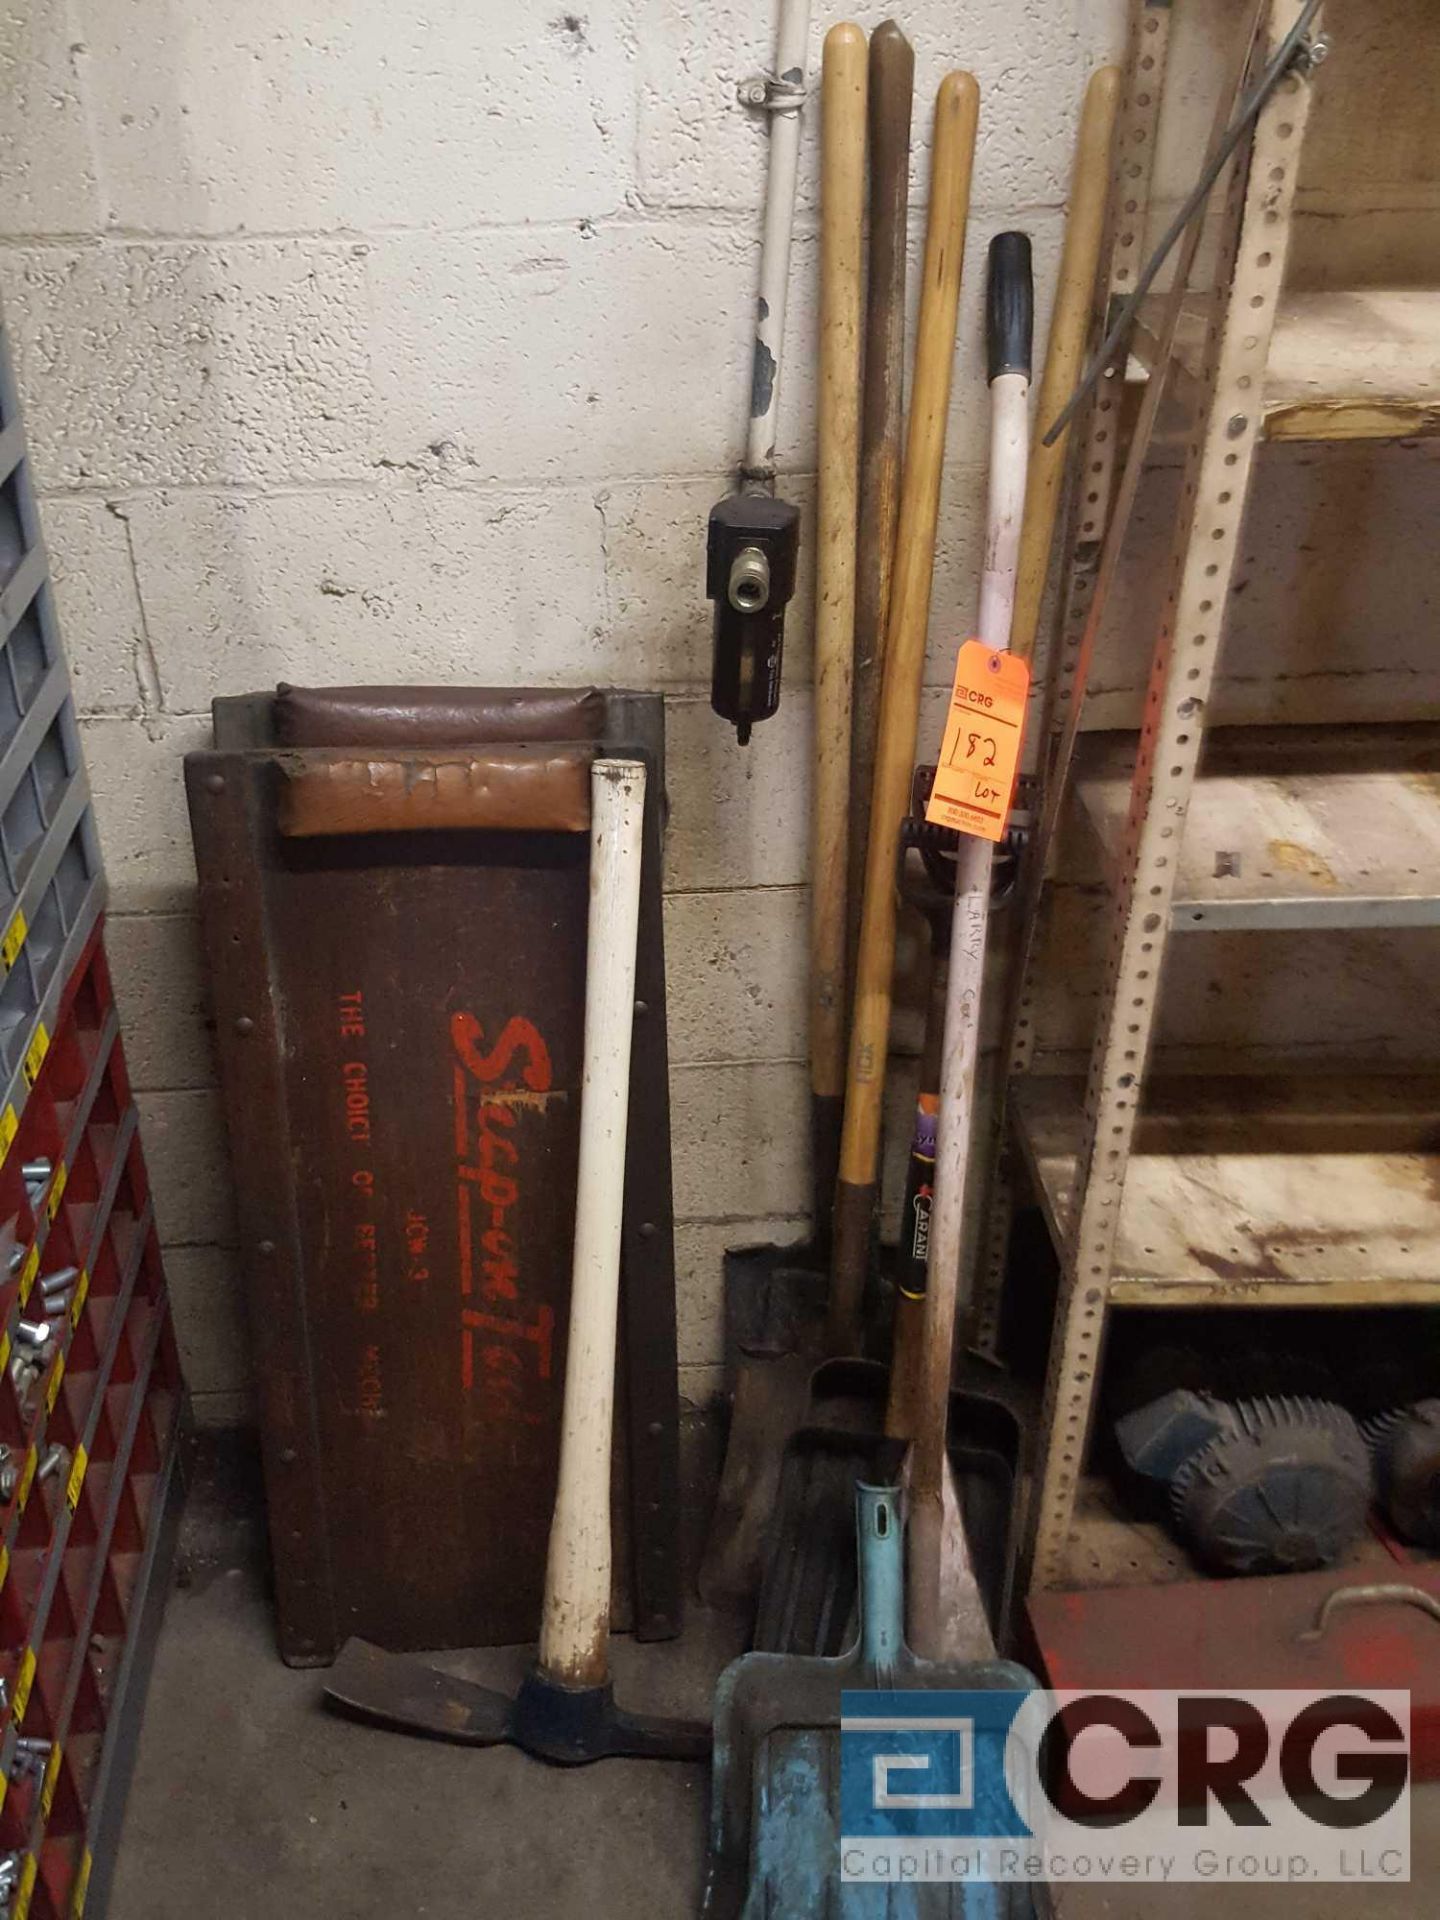 Lot of assorted yard and garage tools , including shovels, pick axe, creepers, etc.